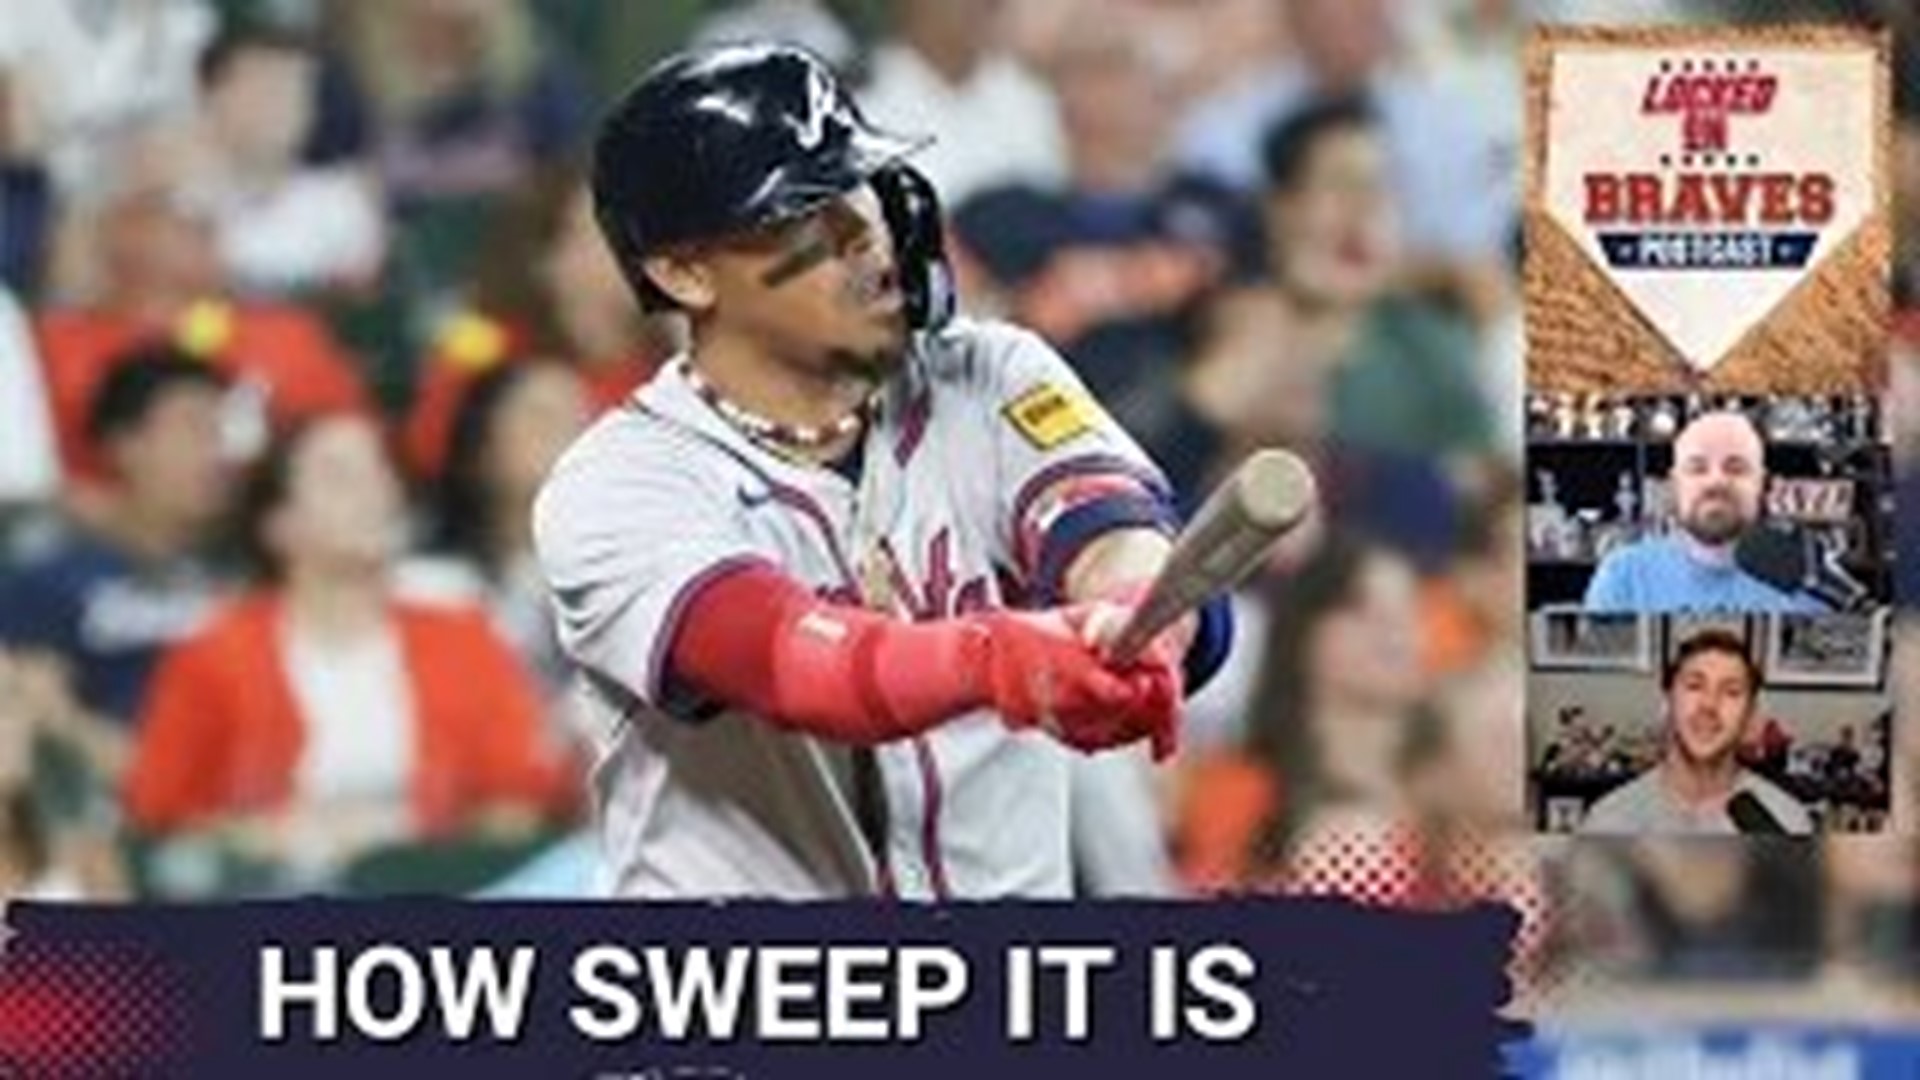 The Atlanta Braves prevailed in extra innings on Wednesday, finishing off their three-game sweep of the Houston Astros with a 5-4 victory at Minute Maid Park.